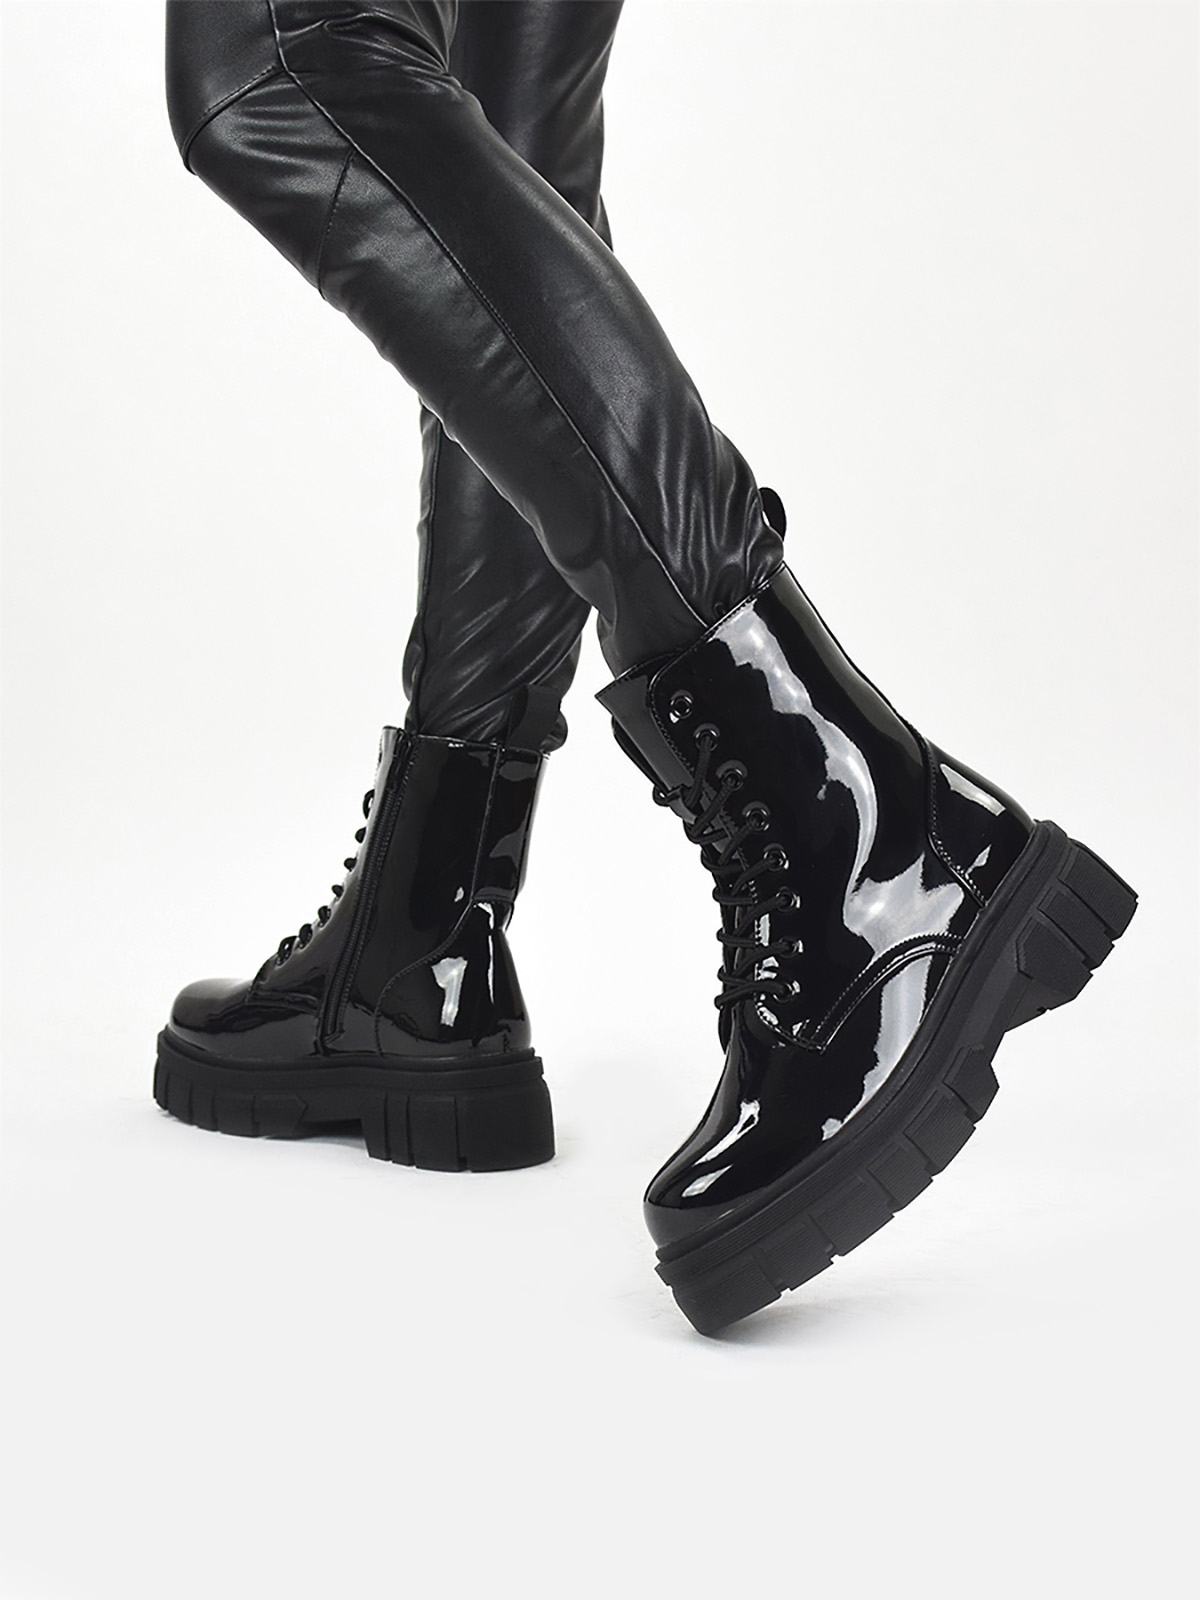 Classic design lace up ankle boots in black patent